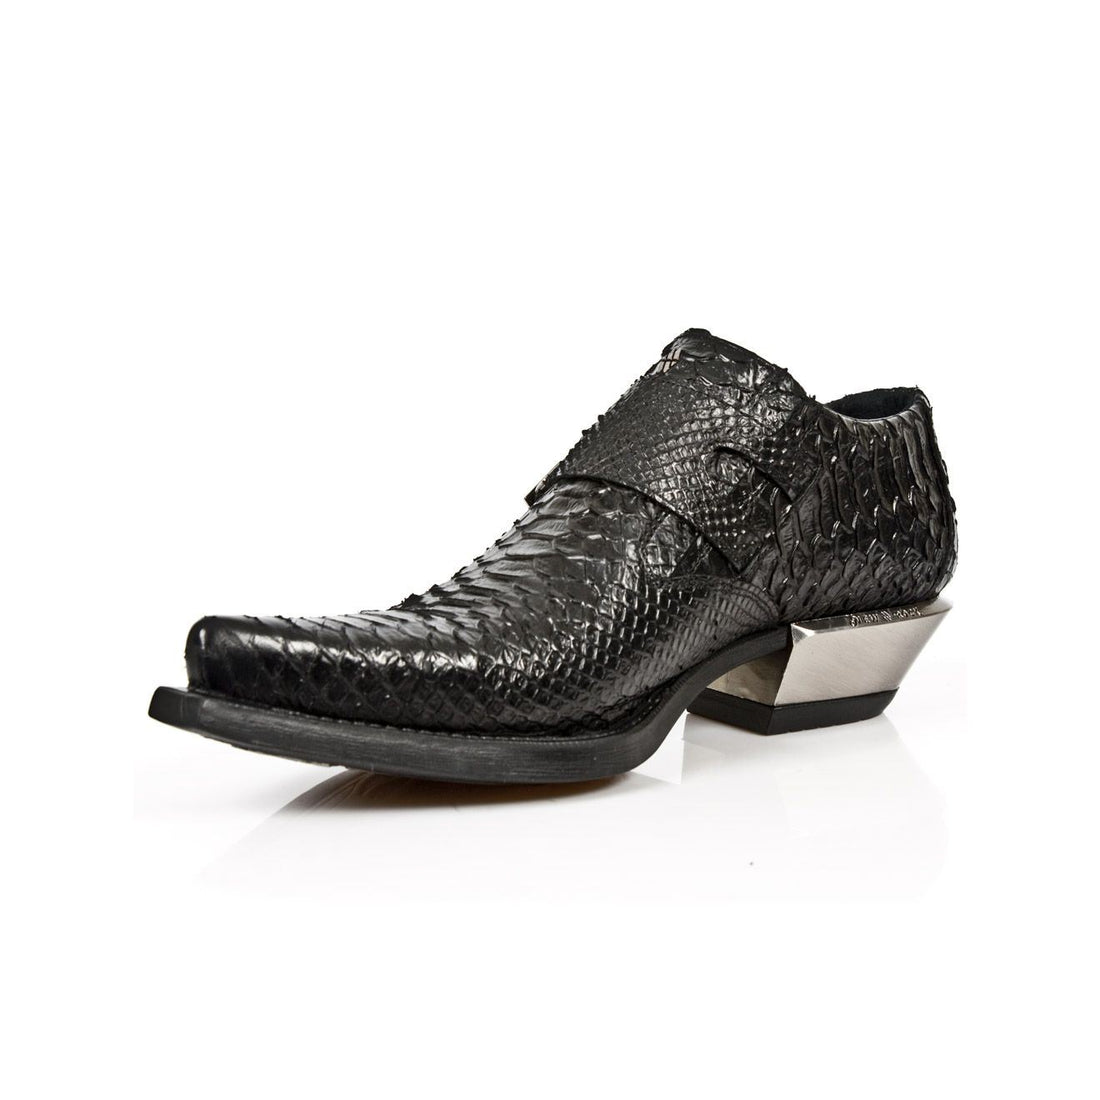 New Rock Embossed Python Black Leather Buckled Shoes-7934-S2